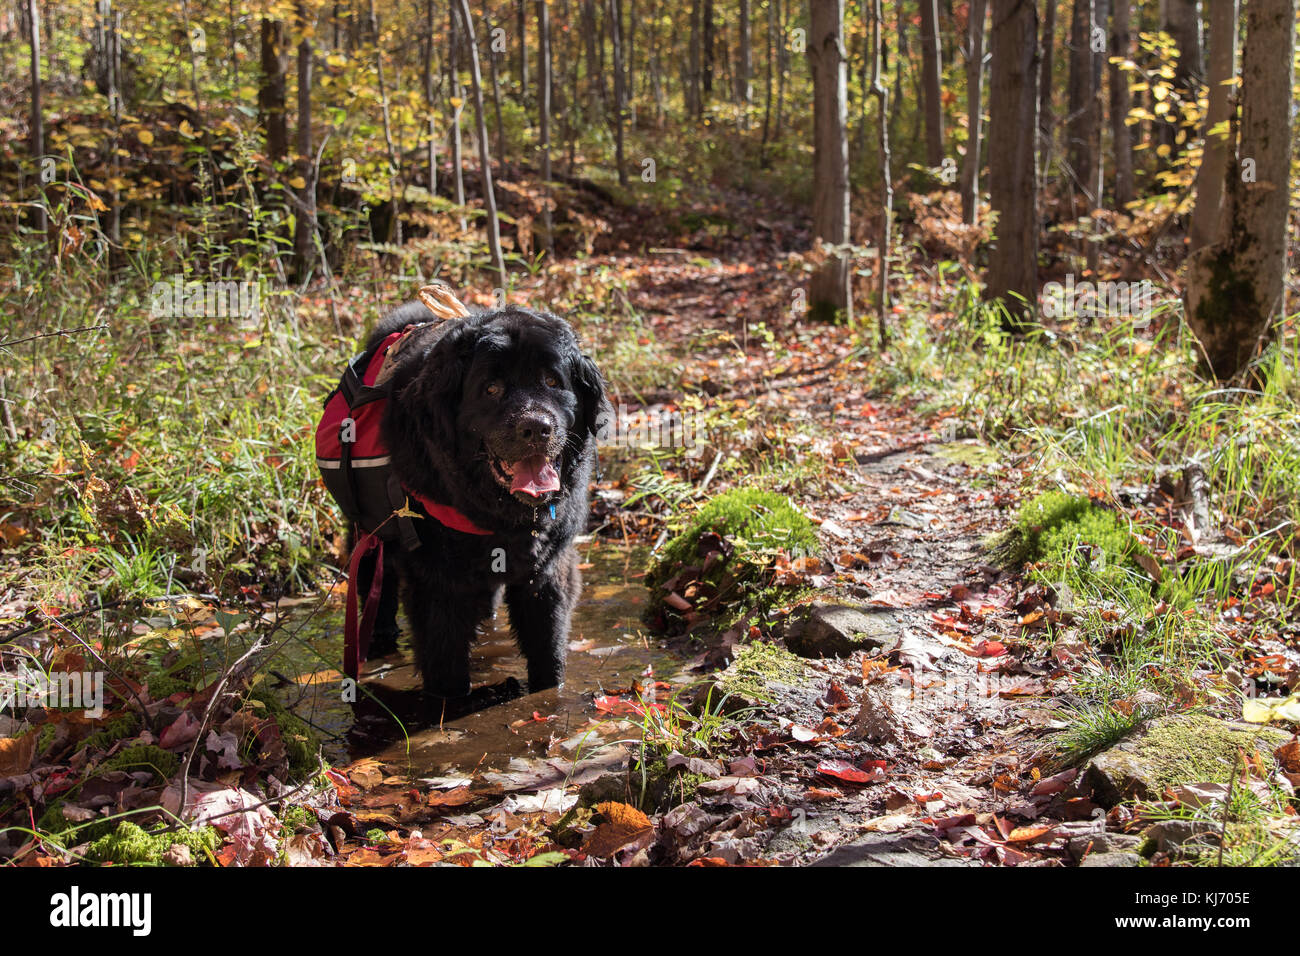 A happy Newfoundland dog wearing a backpack on a hike through the autumn forest Stock Photo